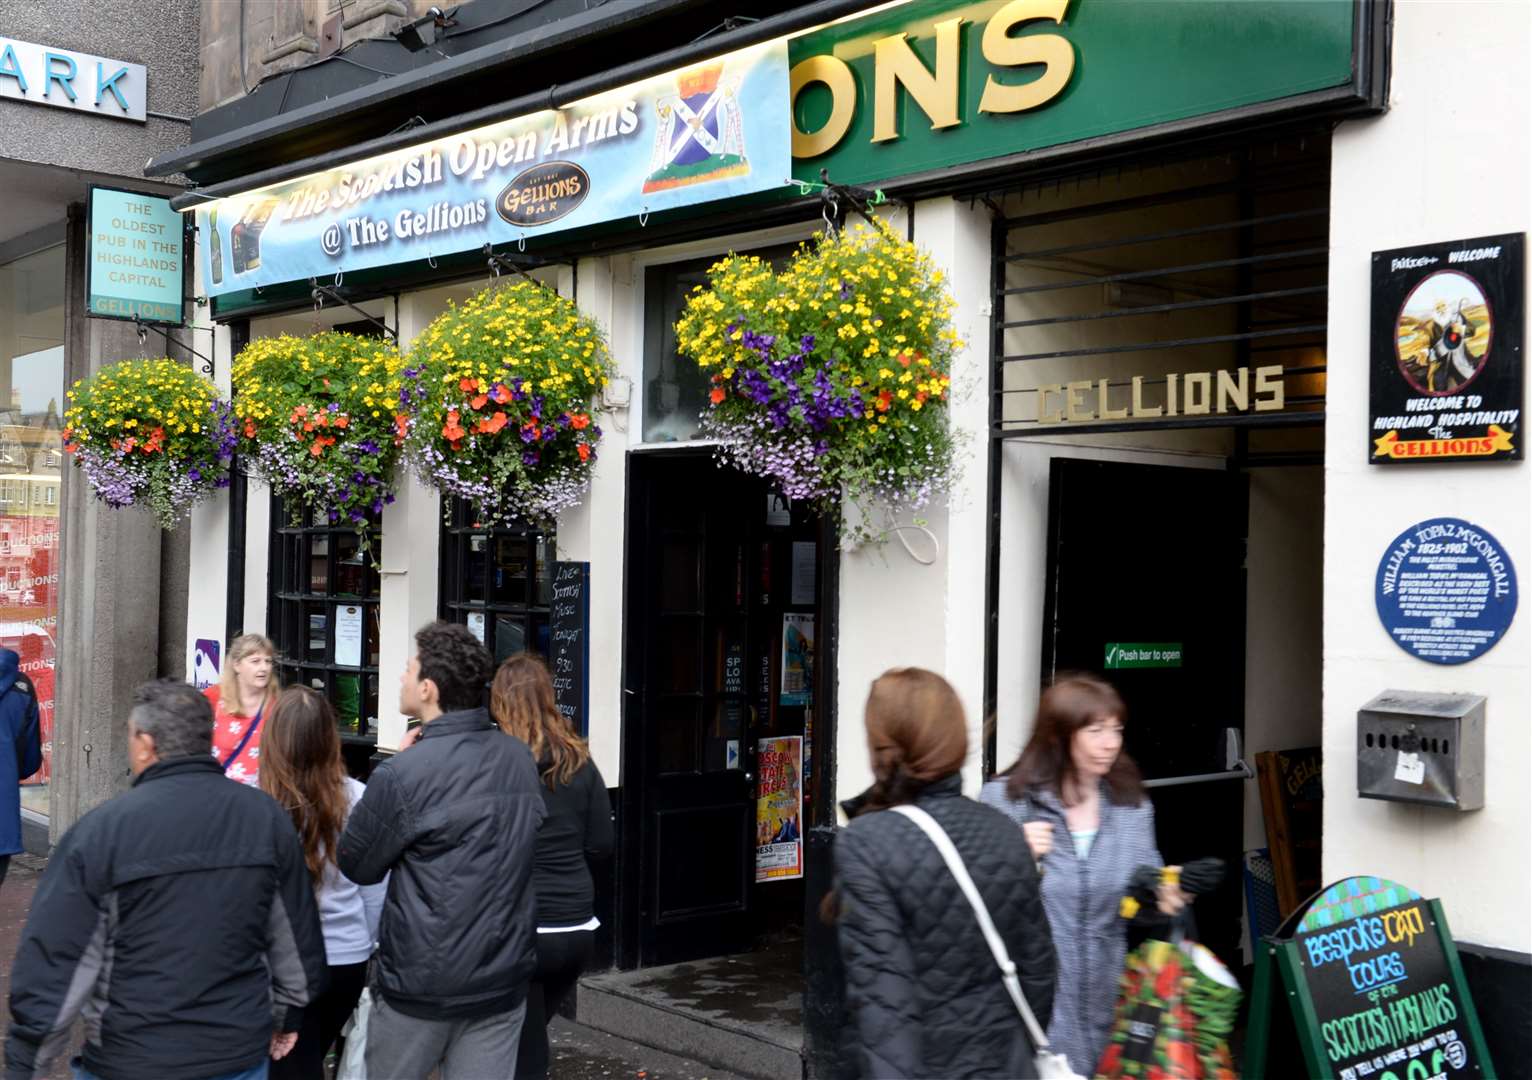 Popular Inverness pub The Gellions has withdrawn an application for a 3am licence.